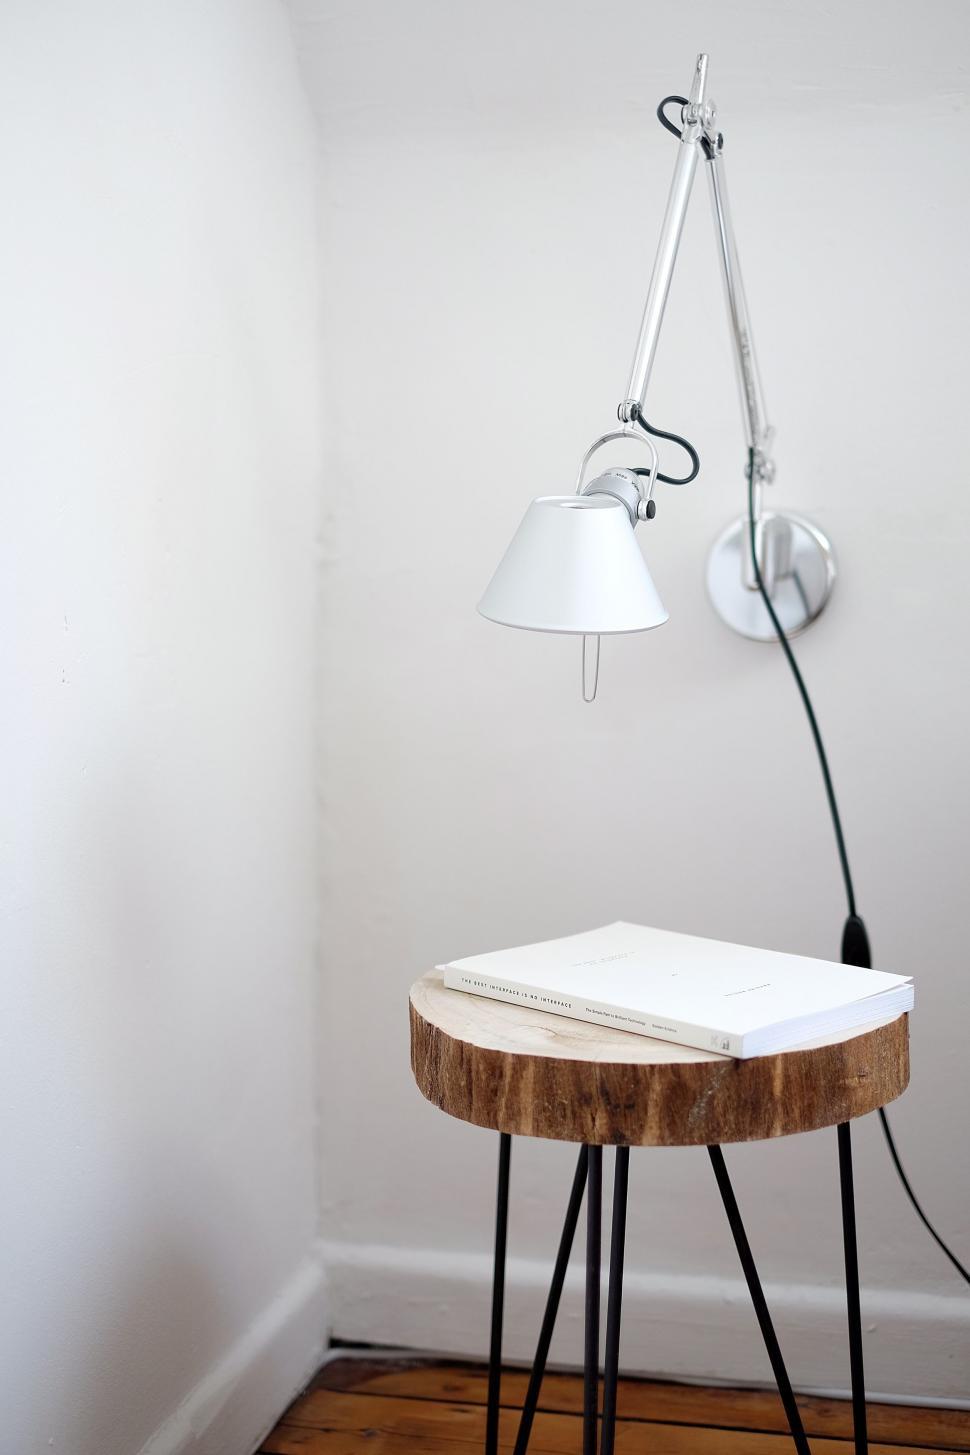 Free Image of A Table With a Lamp 